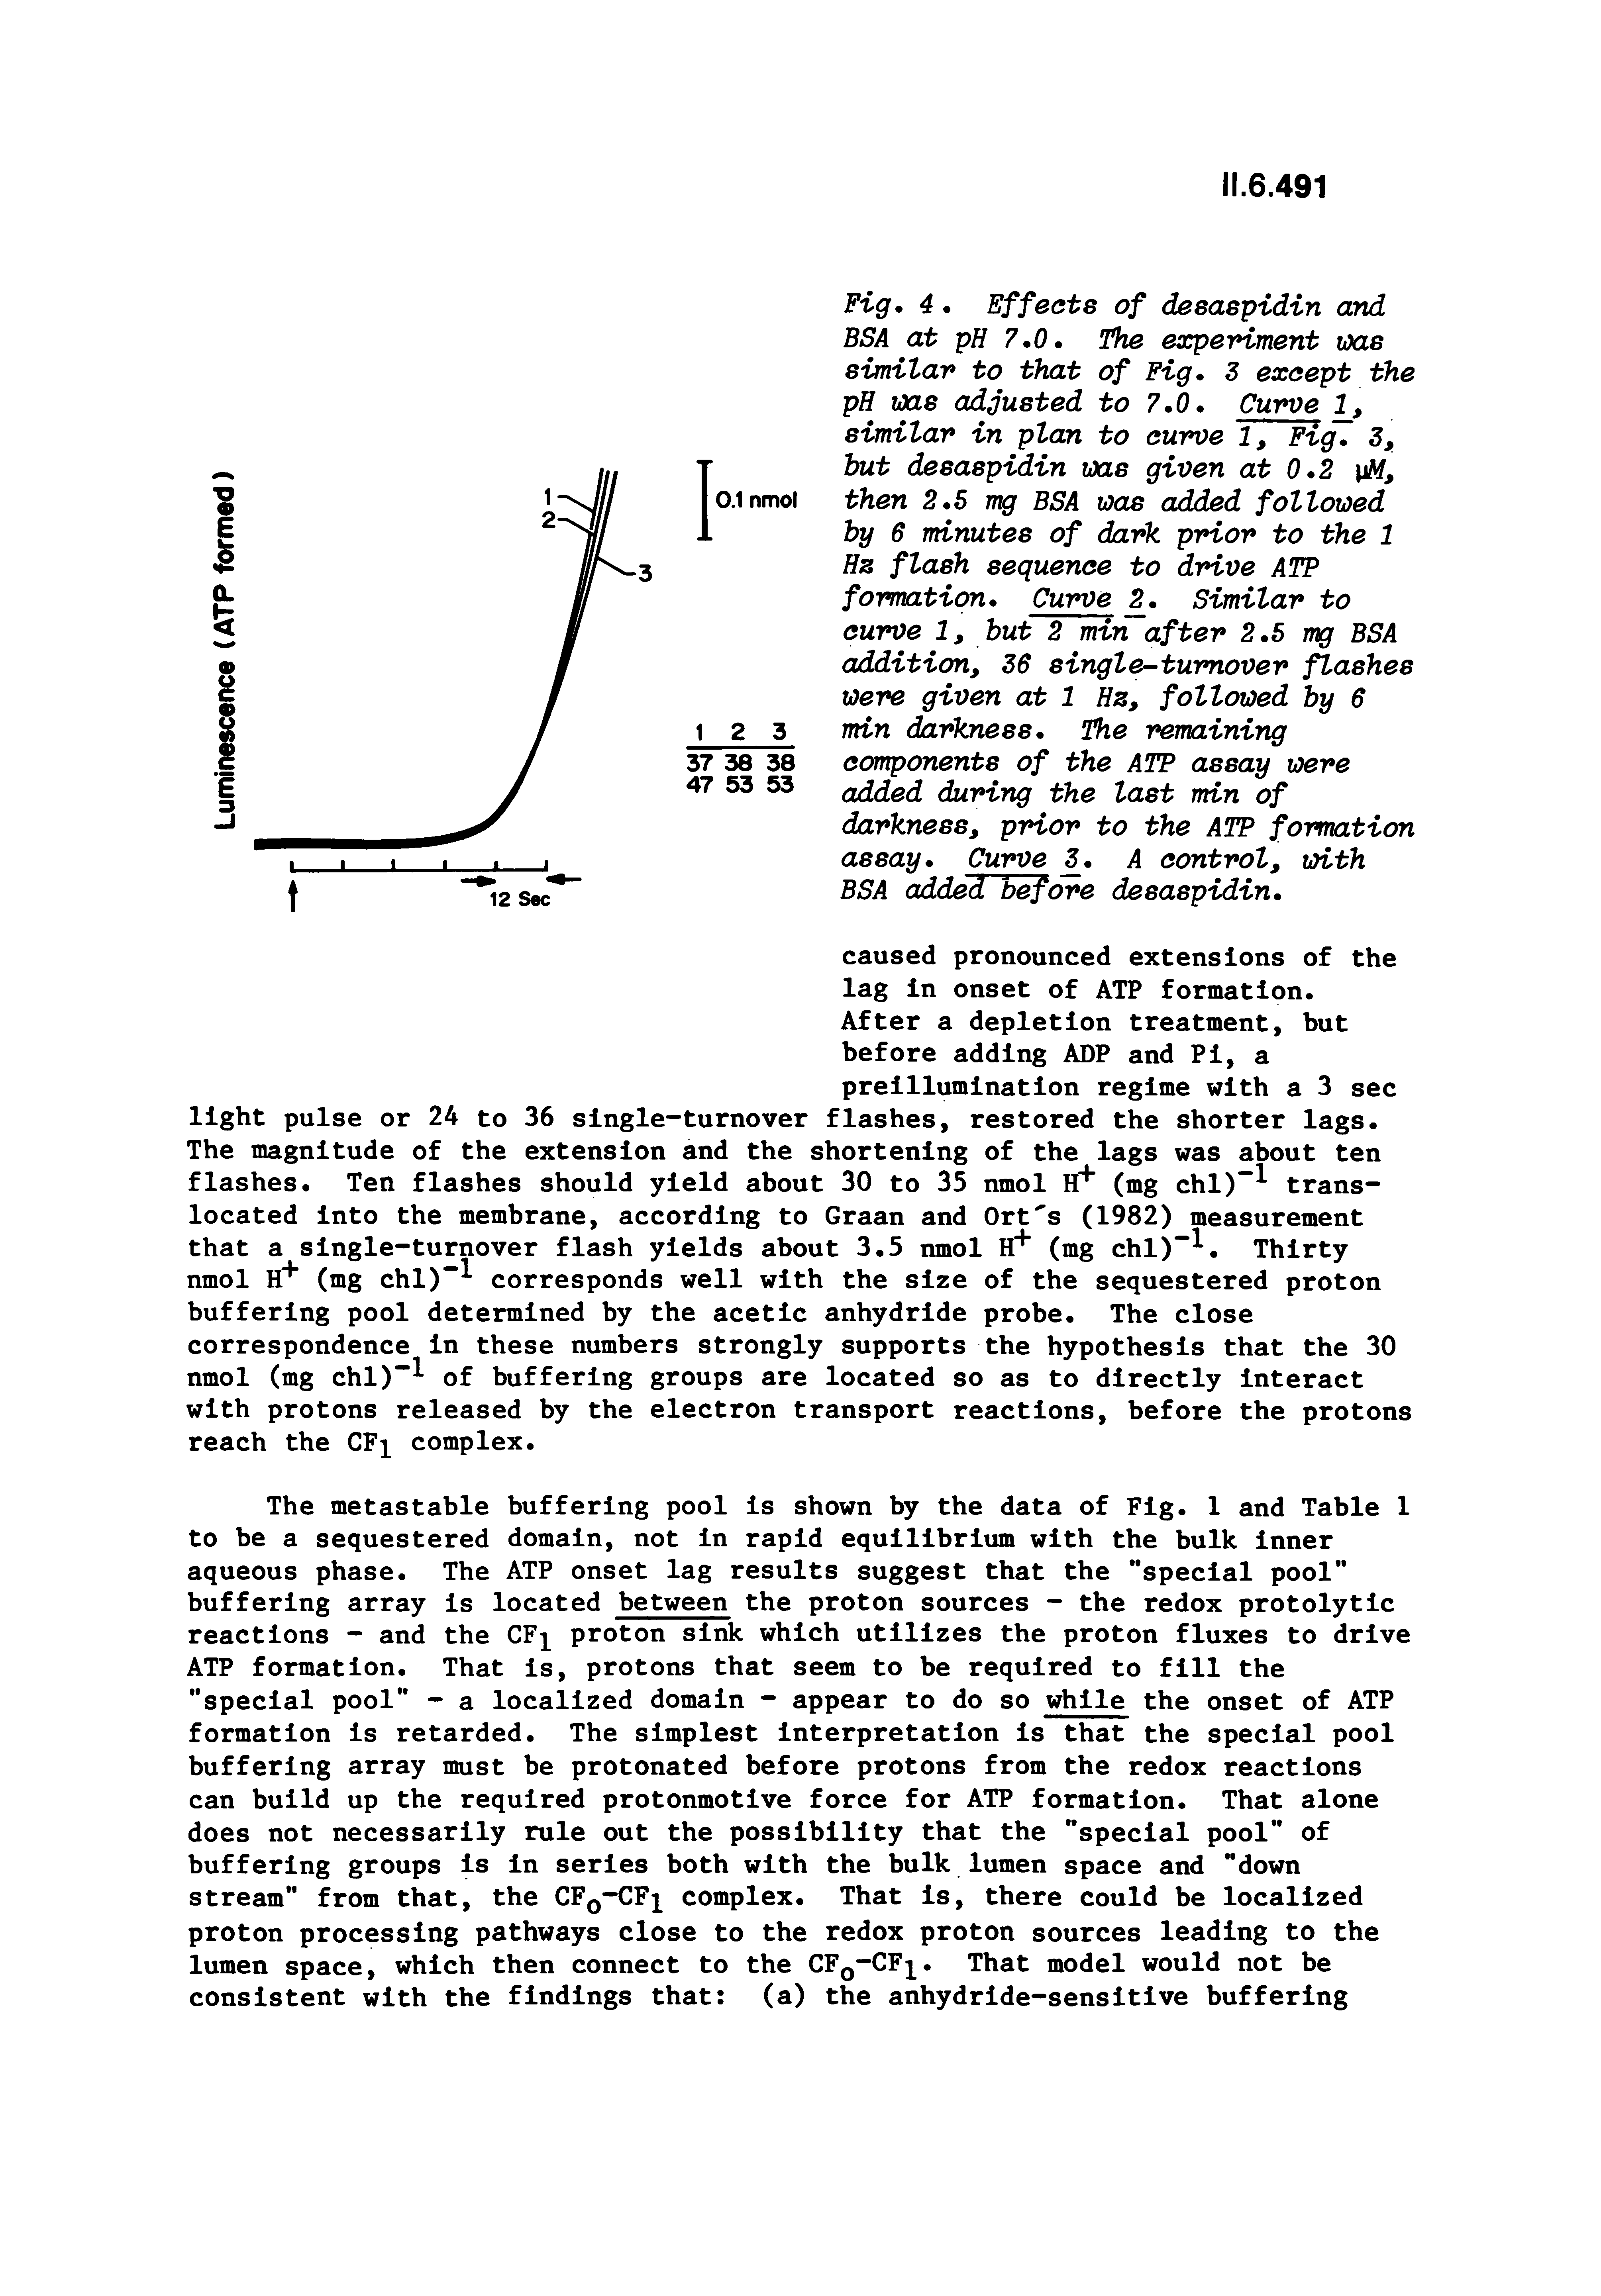 Fig. 4. Effects of deeaspidin and BSA at pH 7.0. The eocperiment was simitar to that of Fig. 3 except the pH was adjusted to 7.0. Curve 1, similar in plan to curve 1, Fig 3, hut djesaspidin was given at 0.2 then 2.5 mg BSA was added followed by 6 minutes of dark prior to the 1 Hz flash sequence to drive ATP formation. Curve Similar to curve 1, hut 2 min after 2.5 mg BSA addition, 36 single-turnover flashes were given at 1 Hz, followed hy 6 min darkness. The remaining components of the ATP assay were added during the last min of darkness, prior to the ATP formation assay. Curye A control, with BSA added before desaspidin.